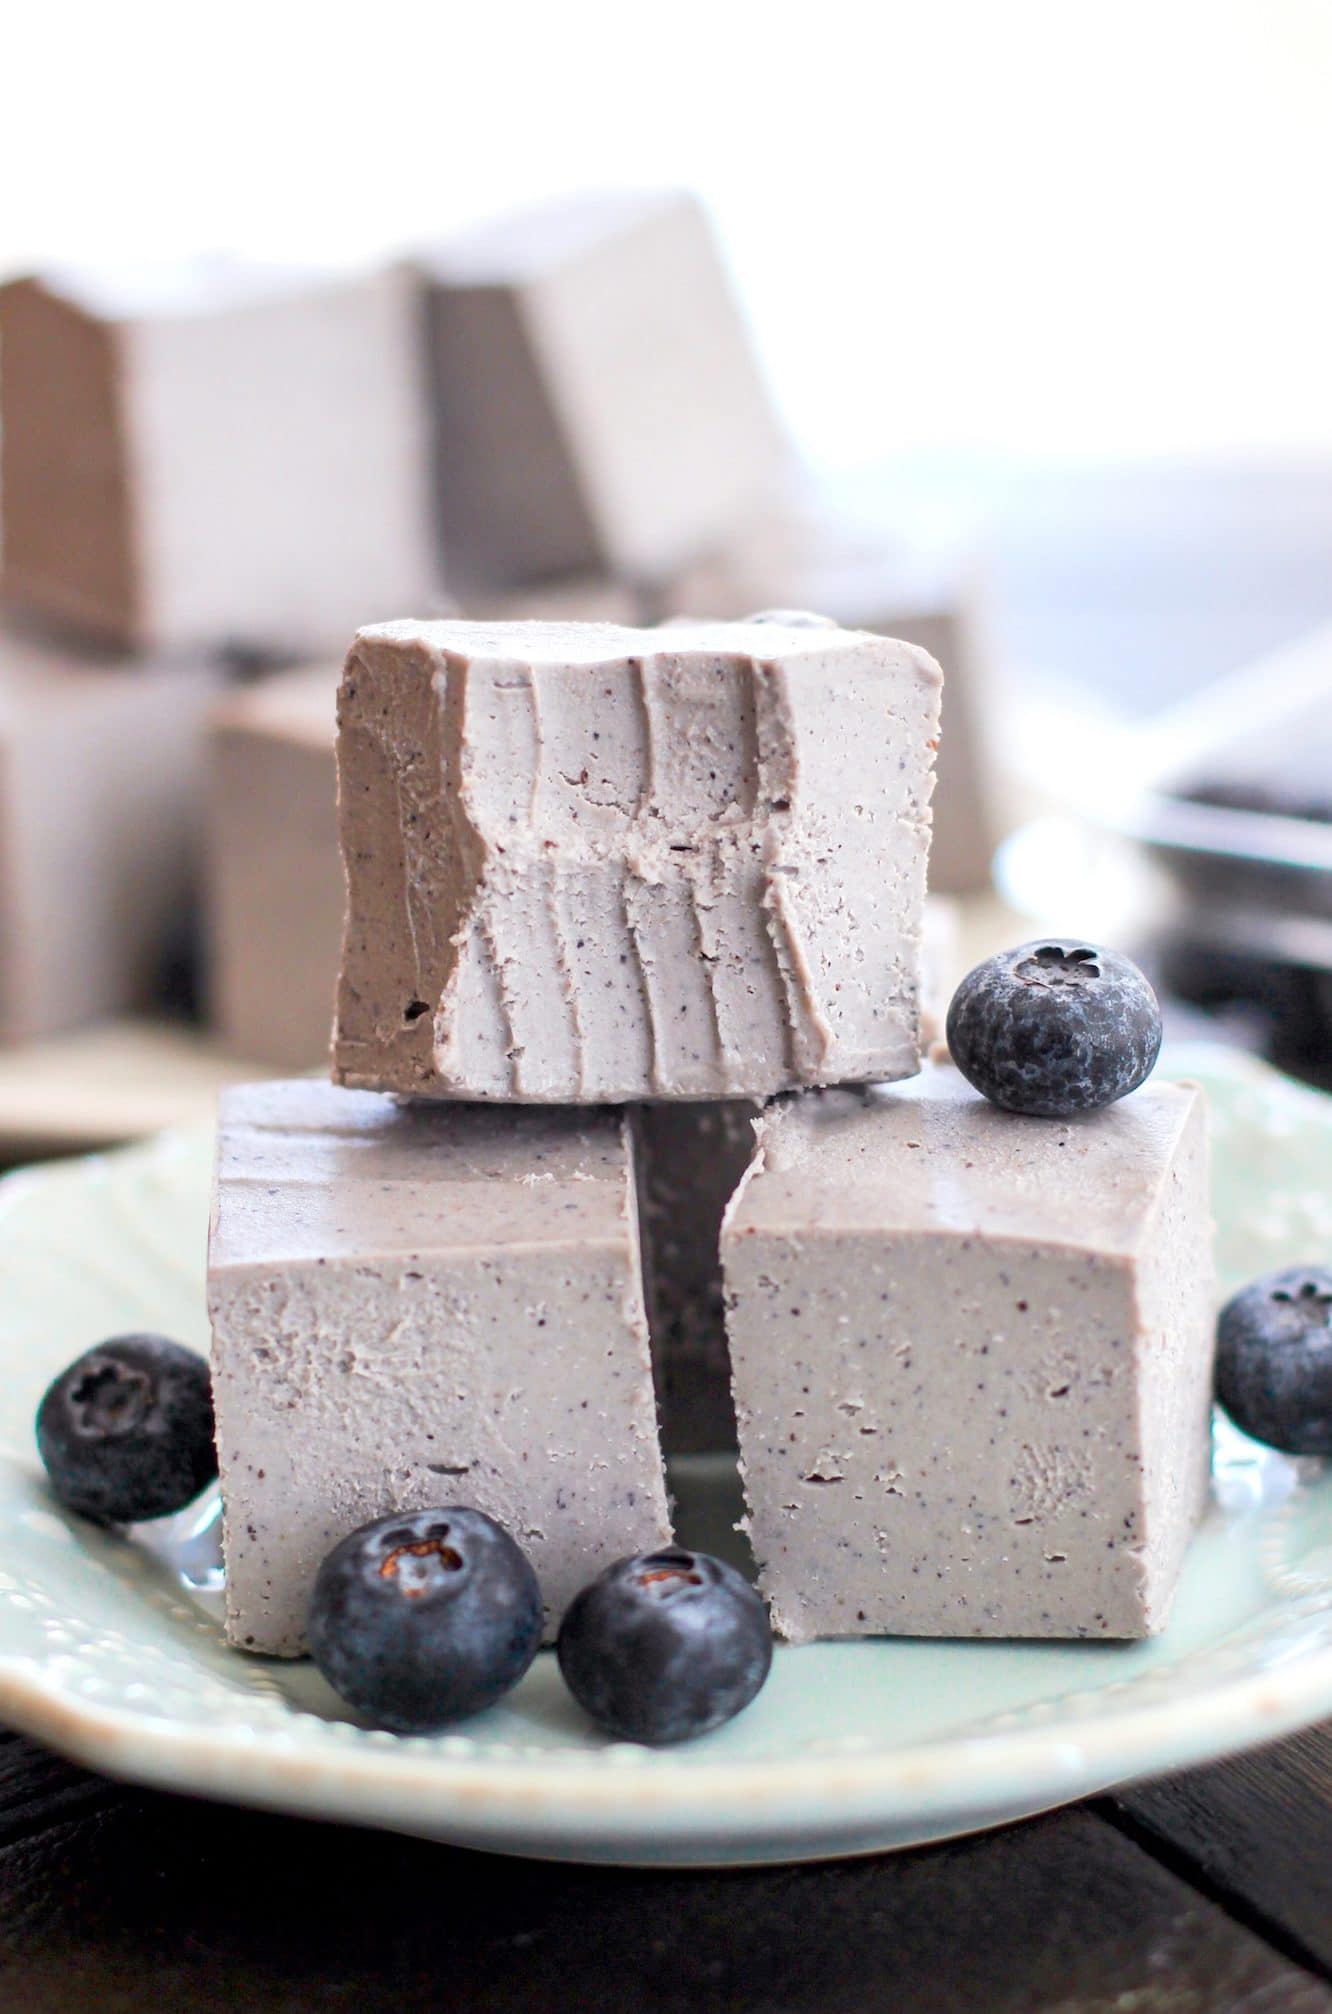 Healthy Raw Blueberry Coconut Fudge (refined sugar free, low carb, gluten free, vegan) - Healthy Dessert Recipes at Desserts with Benefits